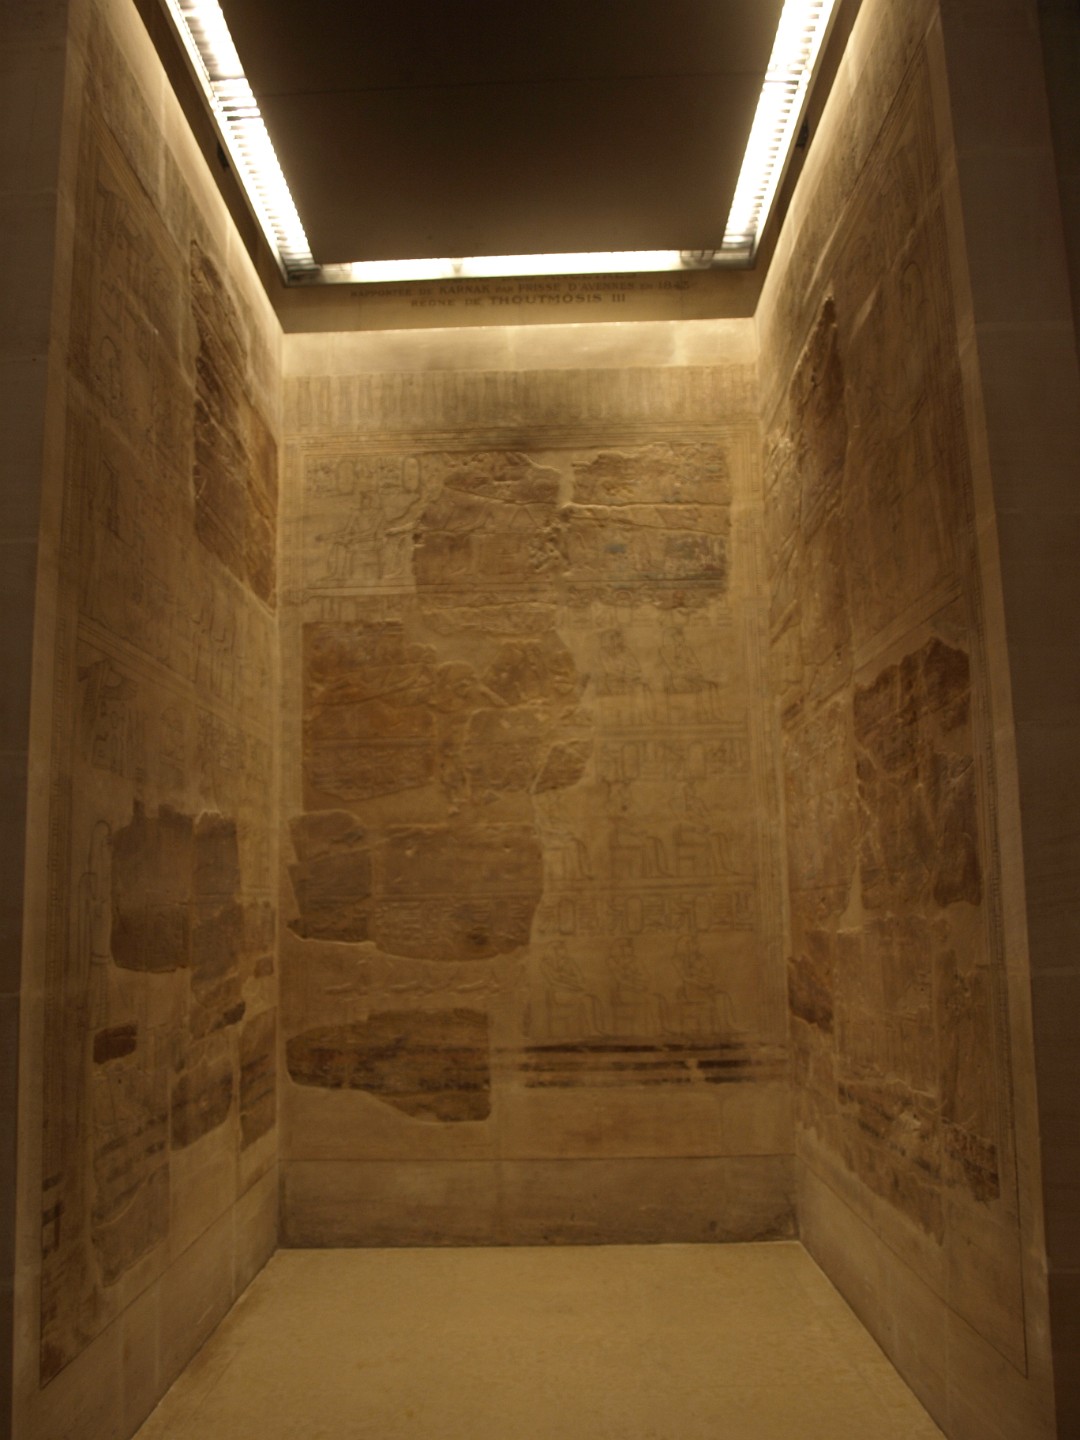 Chamber of Ancesters From the Reign of Pharoah Tutmosis III